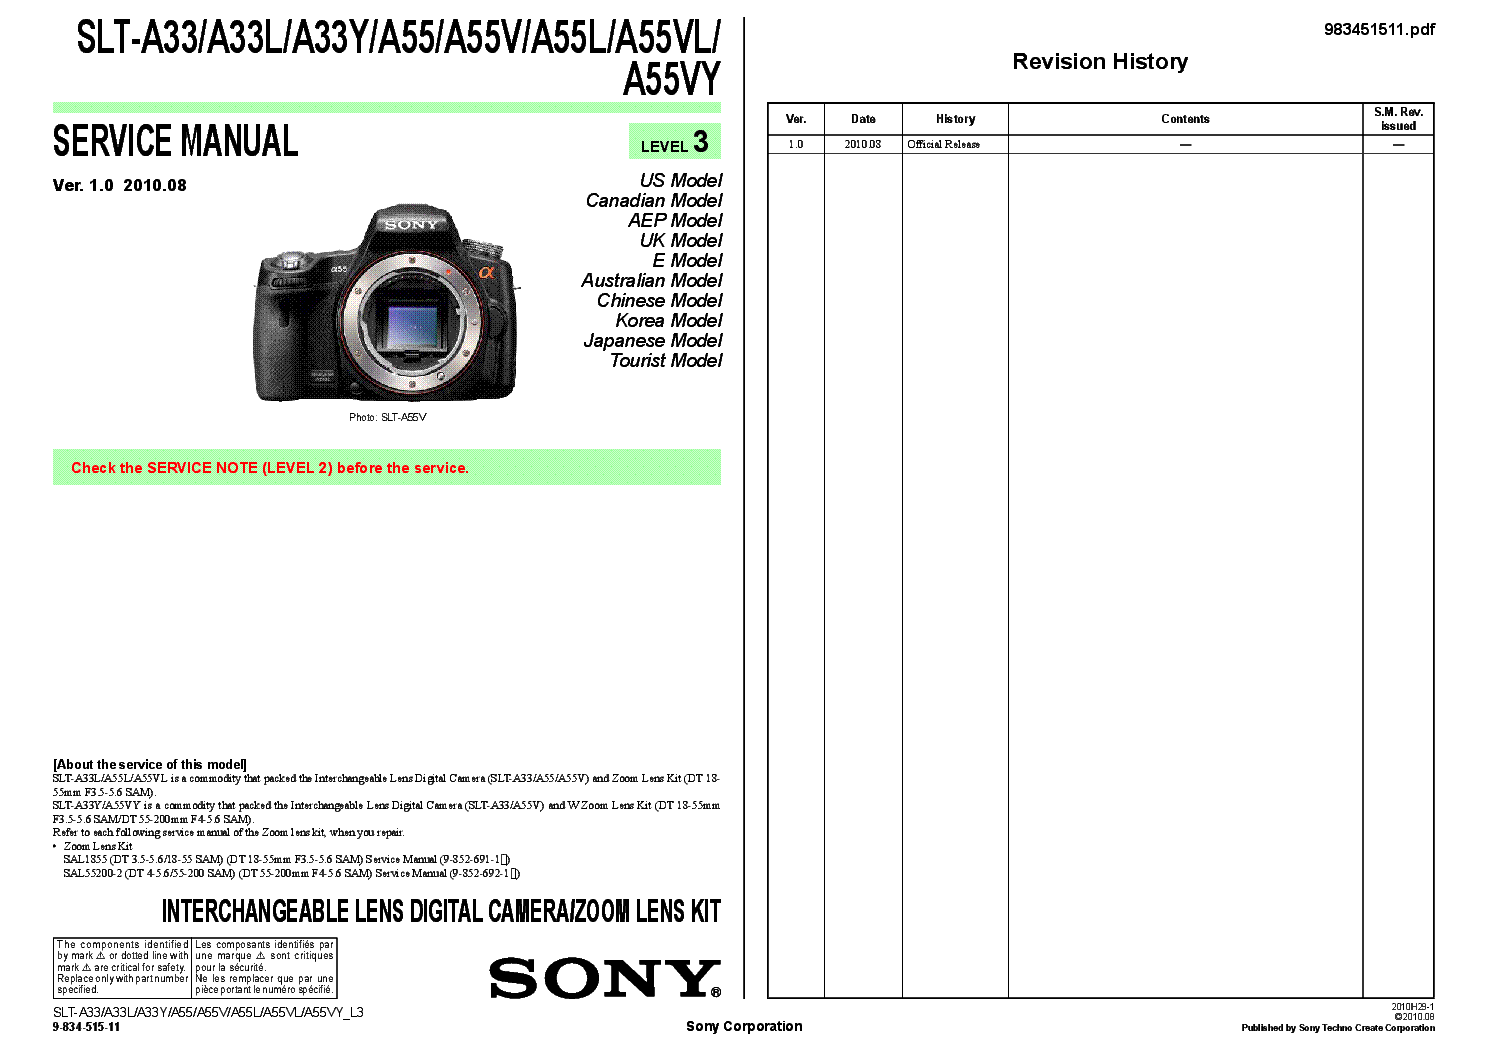 SONY SLT-A33 A33L A33Y A55 A55V A55L A55VL A55VY VER.1.0 LEVEL3 service manual (1st page)